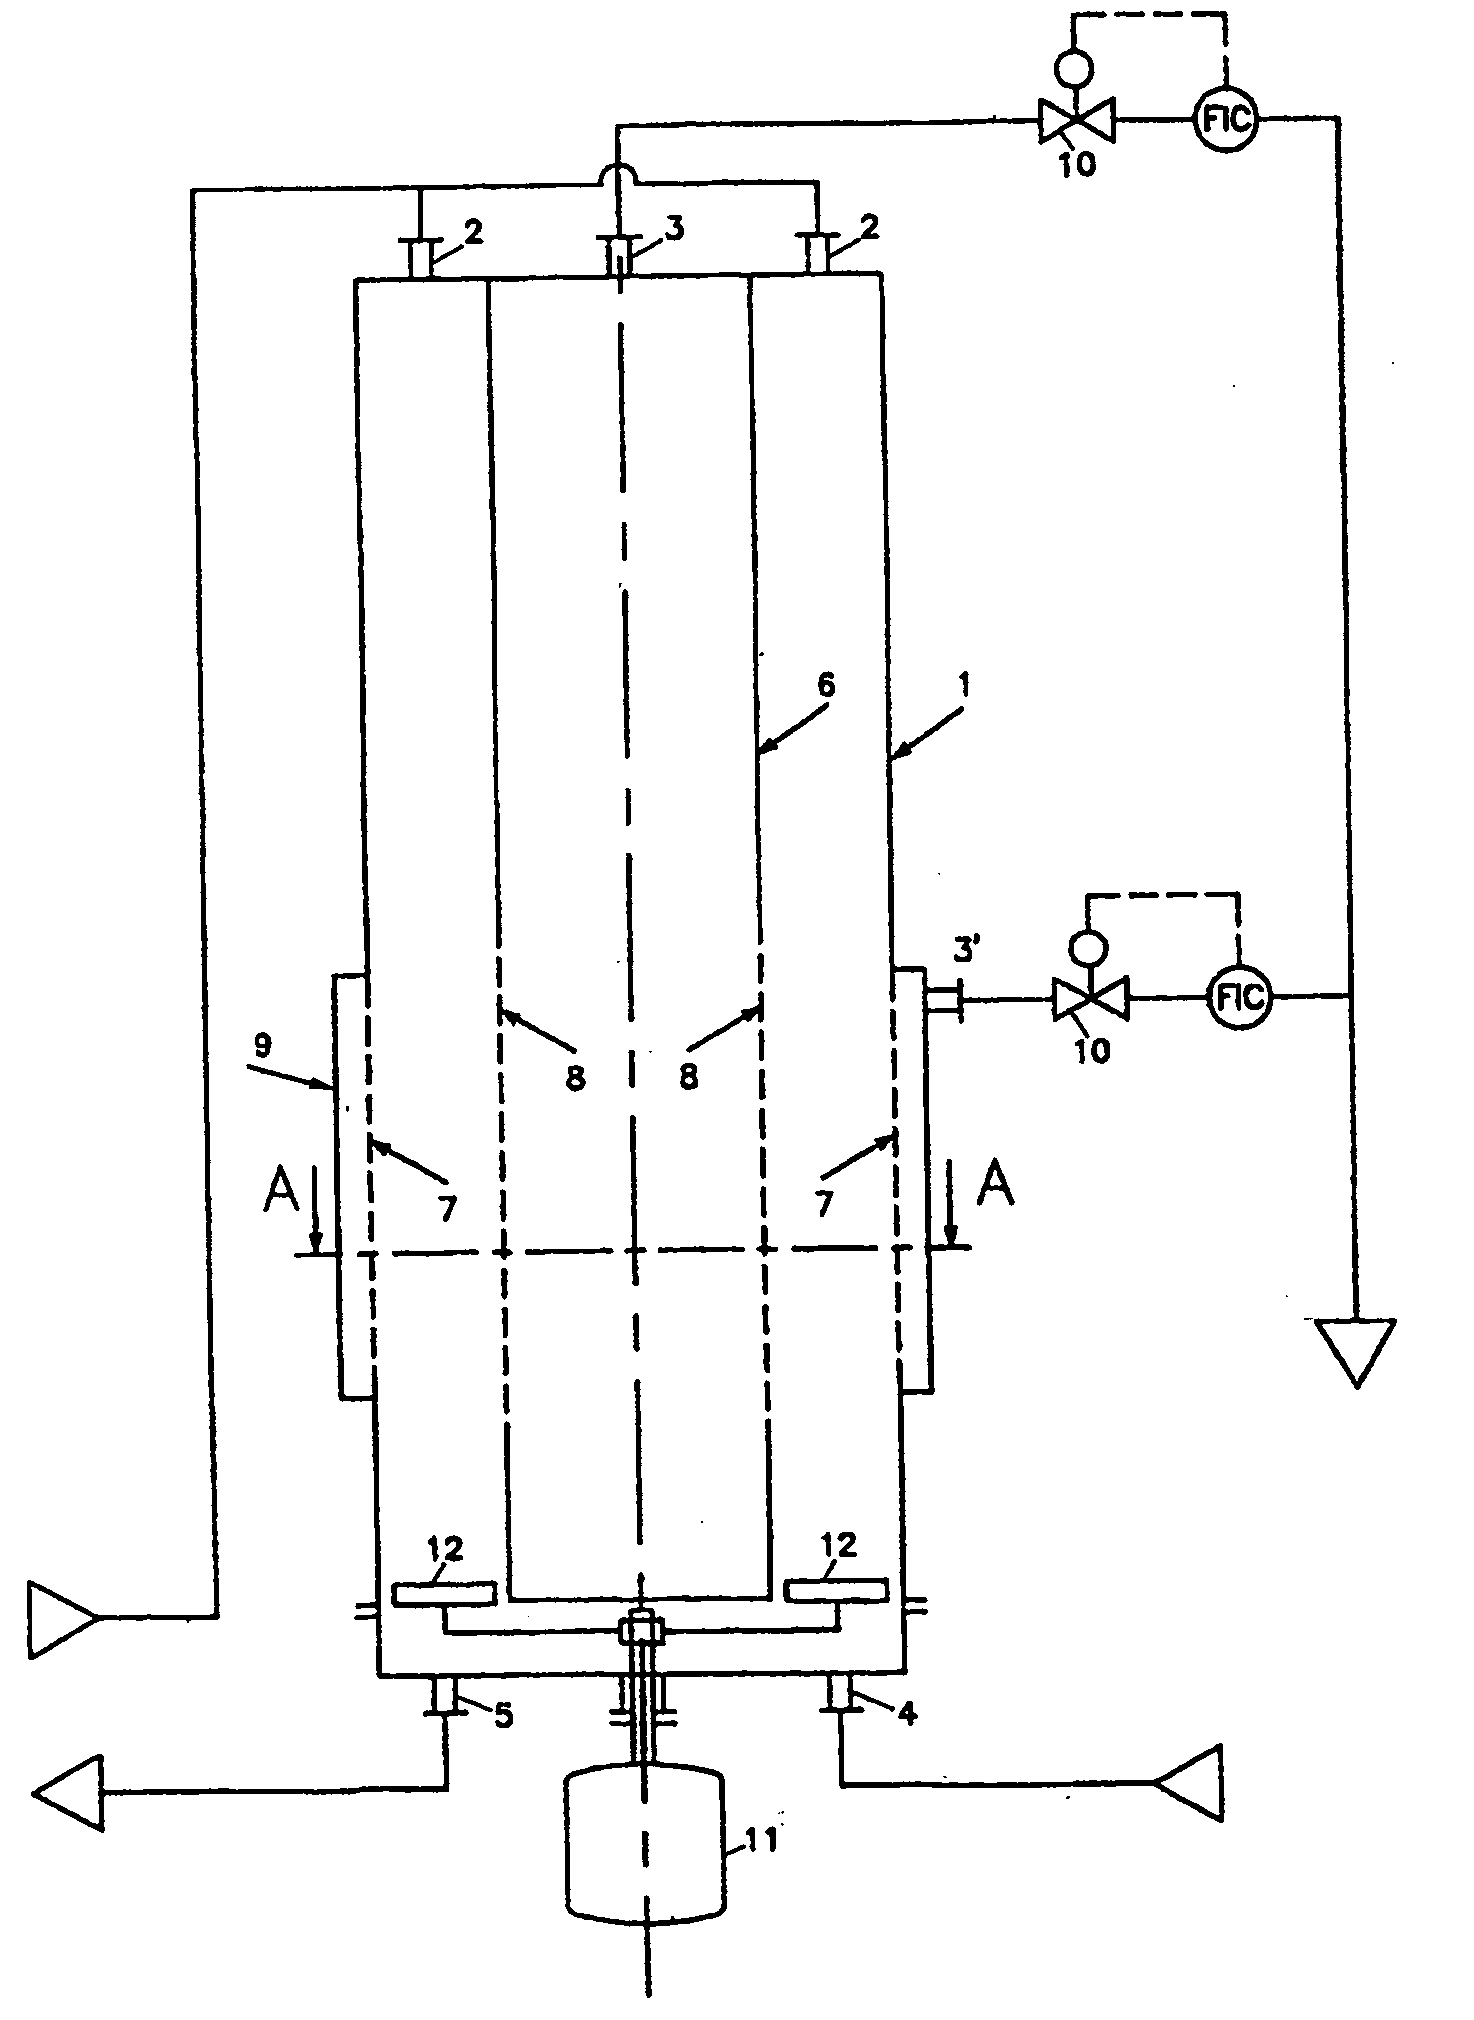 Hydraulic annular washing column, and process for separating solids from a suspension